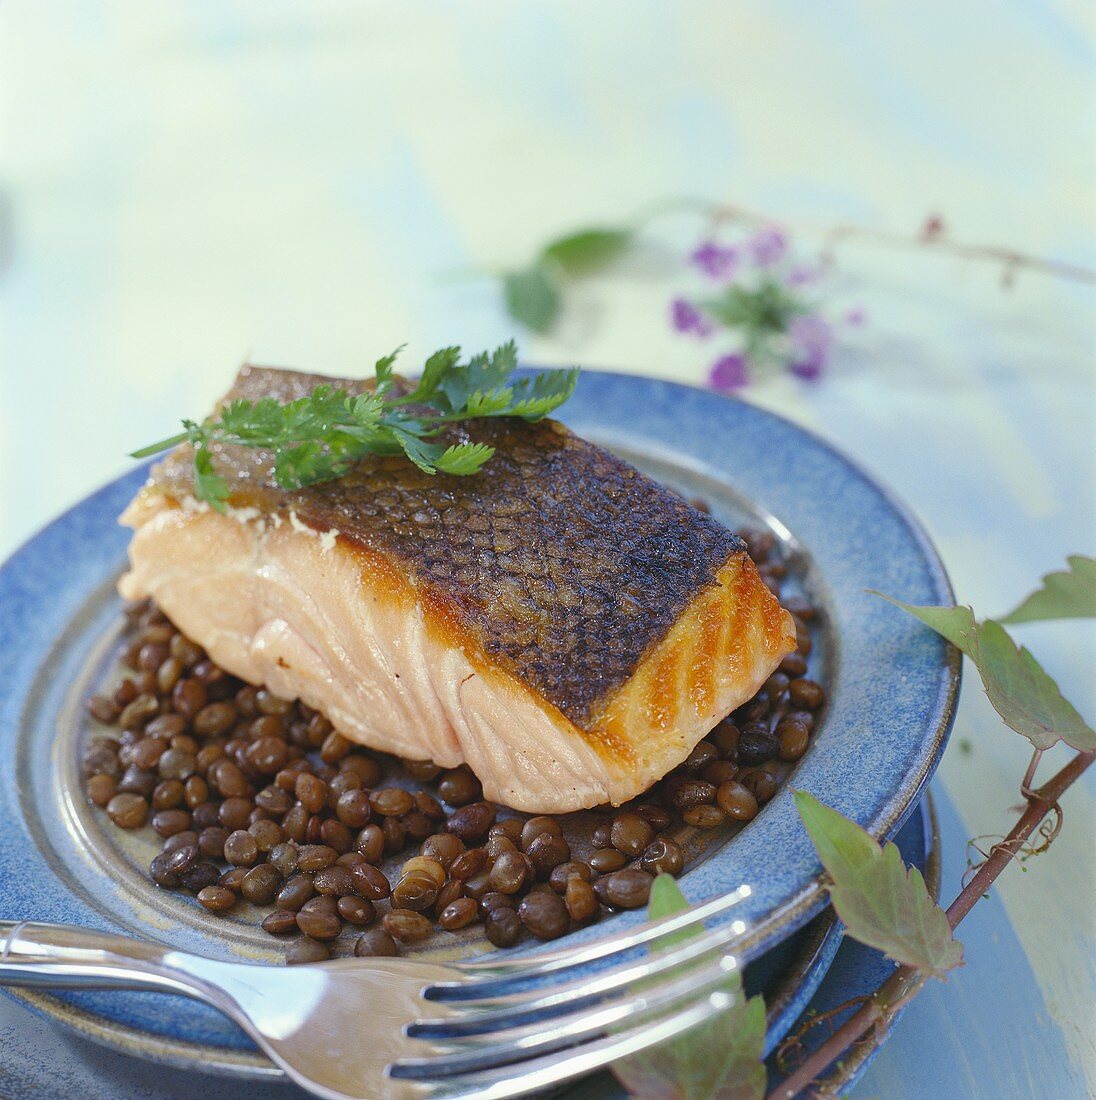 Grilled salmon on lentils